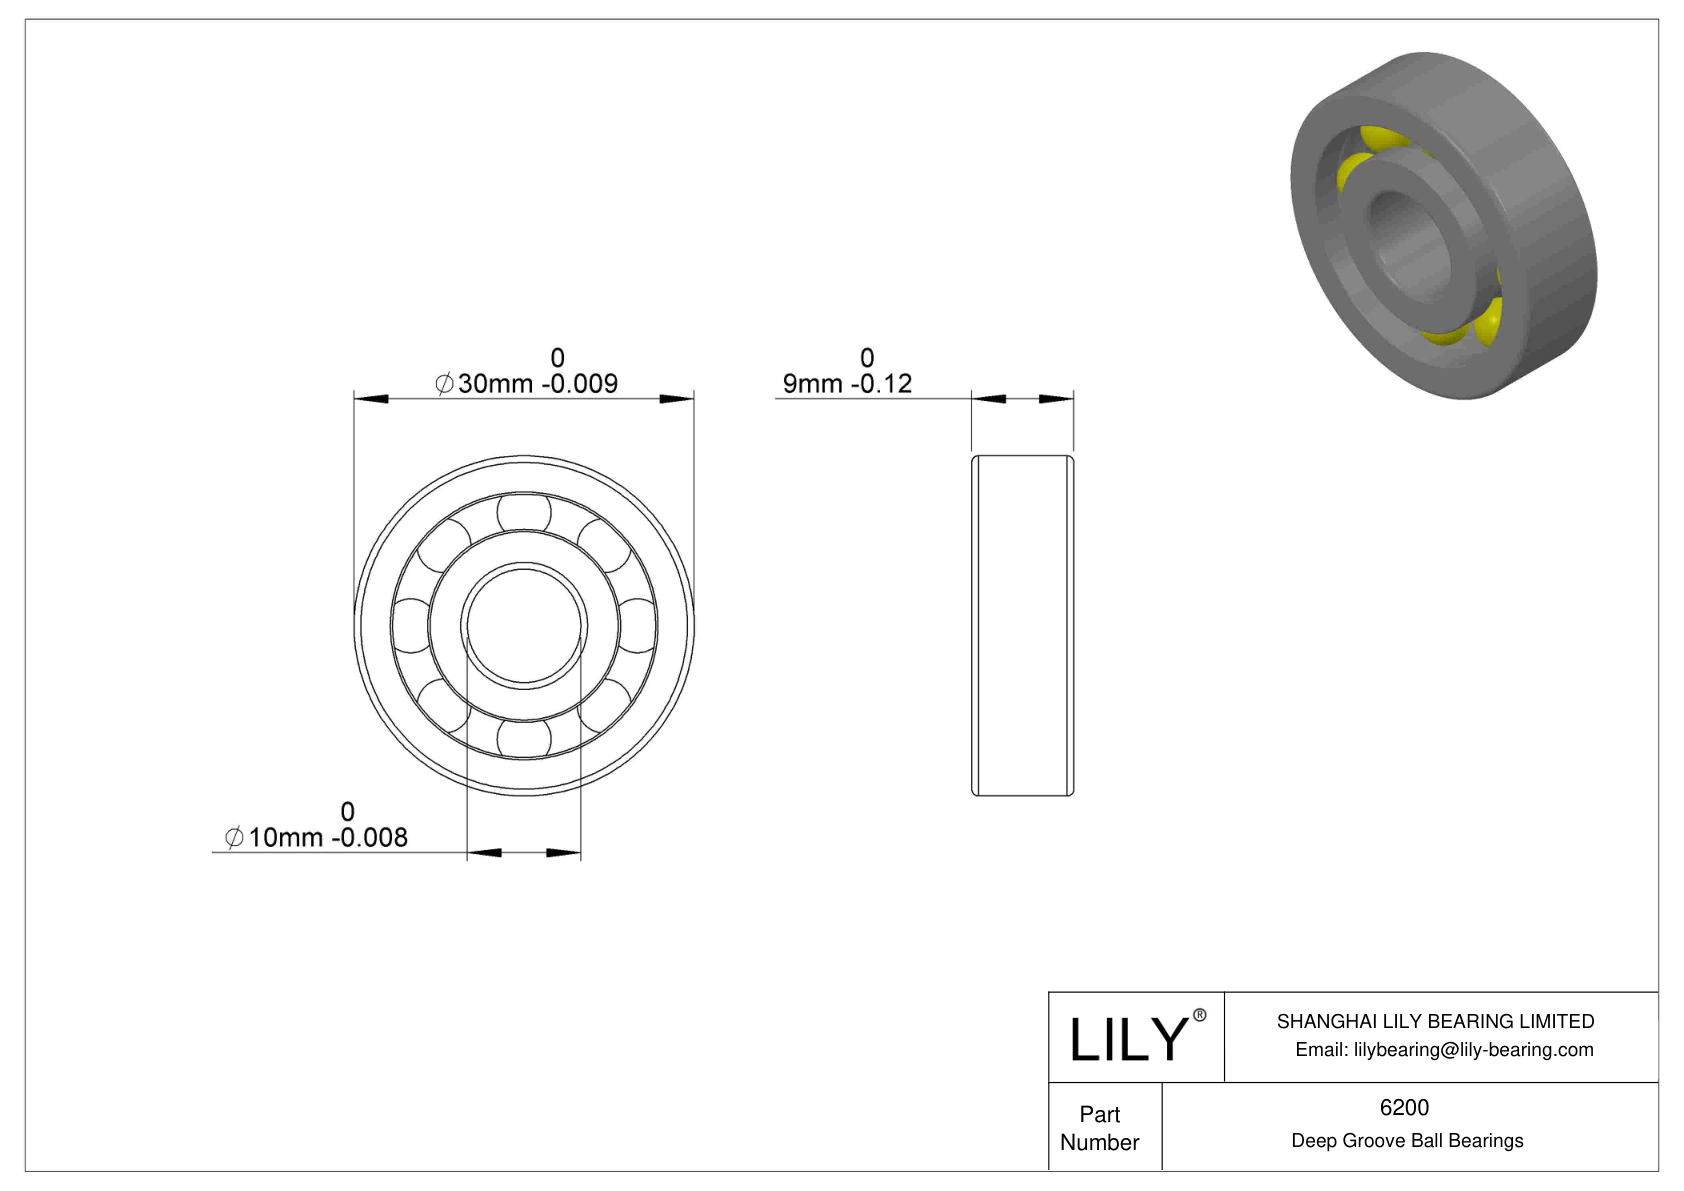 LILY-PU620036-13C3L10M8 Polyurethane Coated Bearing With Screw cad drawing